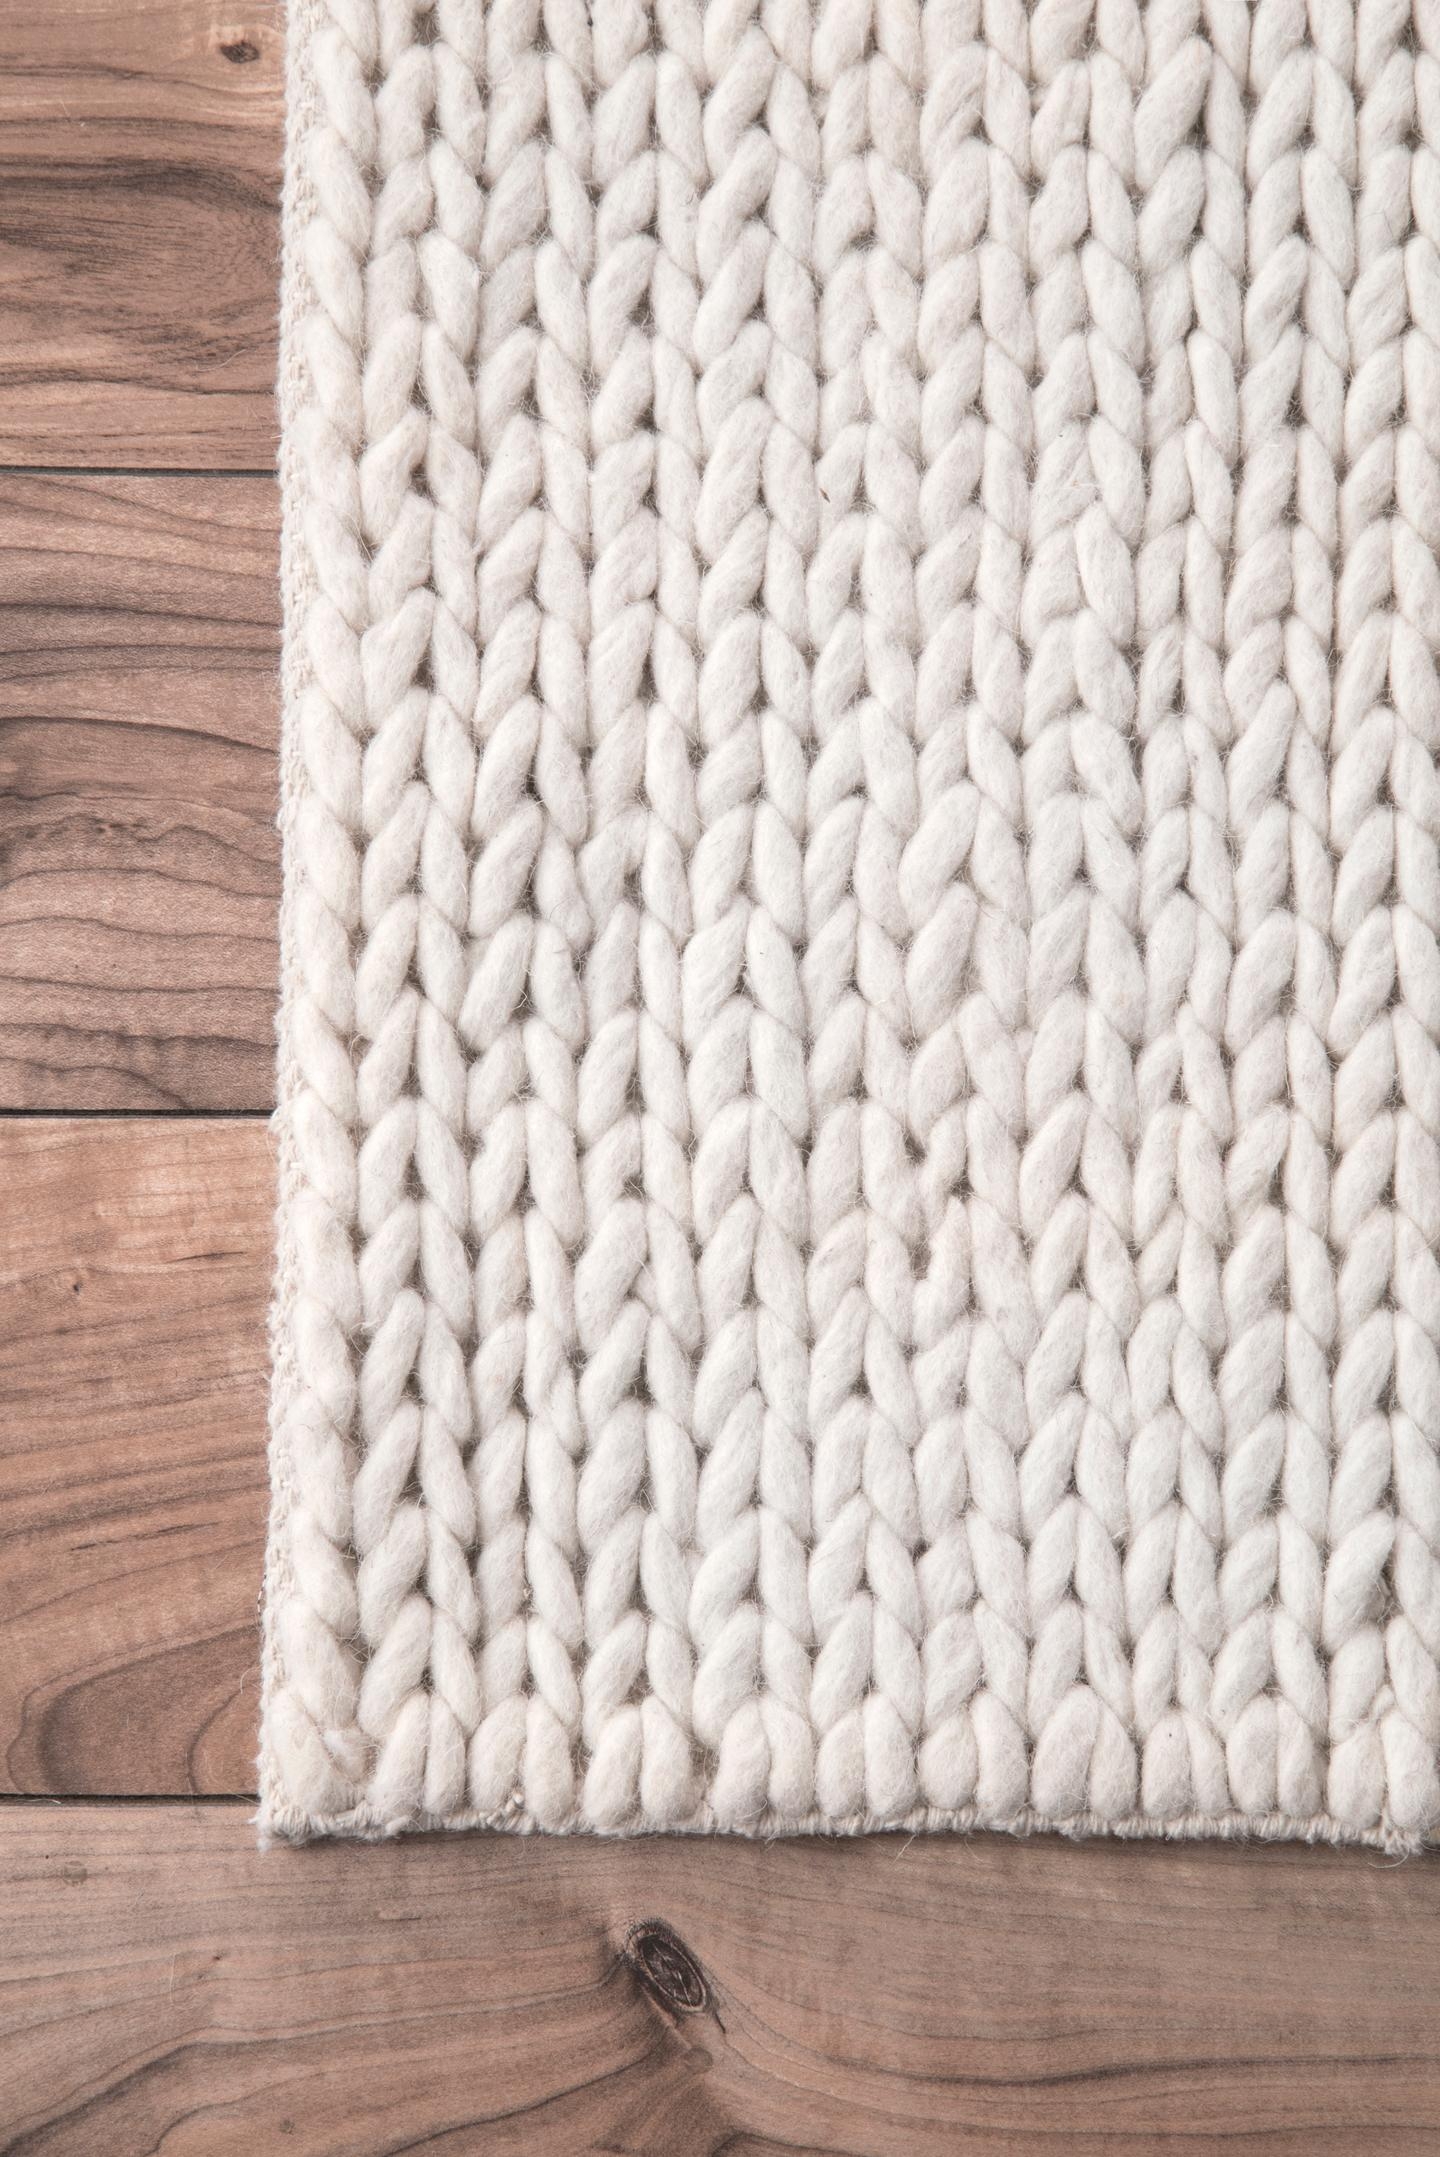 Hand Woven Chunky Woolen Cable Rug Area Rug - Image 3